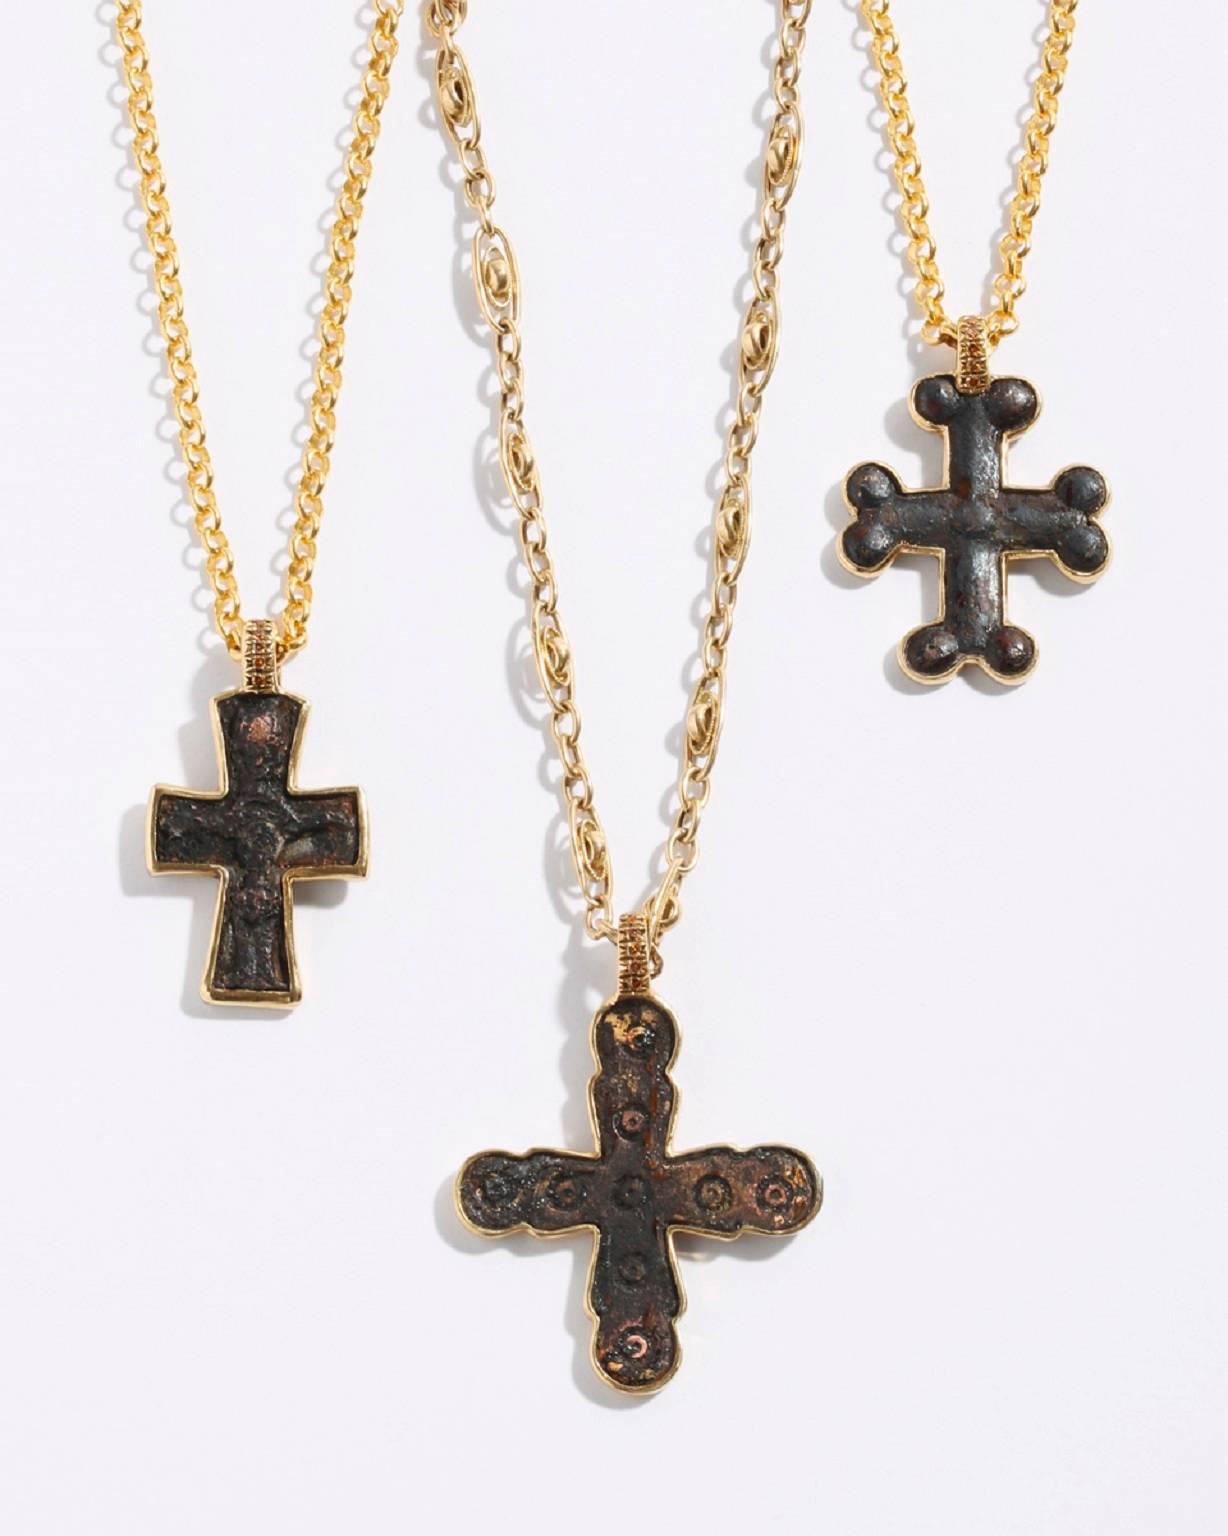 9th Century A.D. Bronze cross framed in 22K Yellow Gold with six stones 0.6ct cognac colored diamonds on an 18 inch 24K Yellow Gold satellite fancy link chain. Certificate of Authentication available.